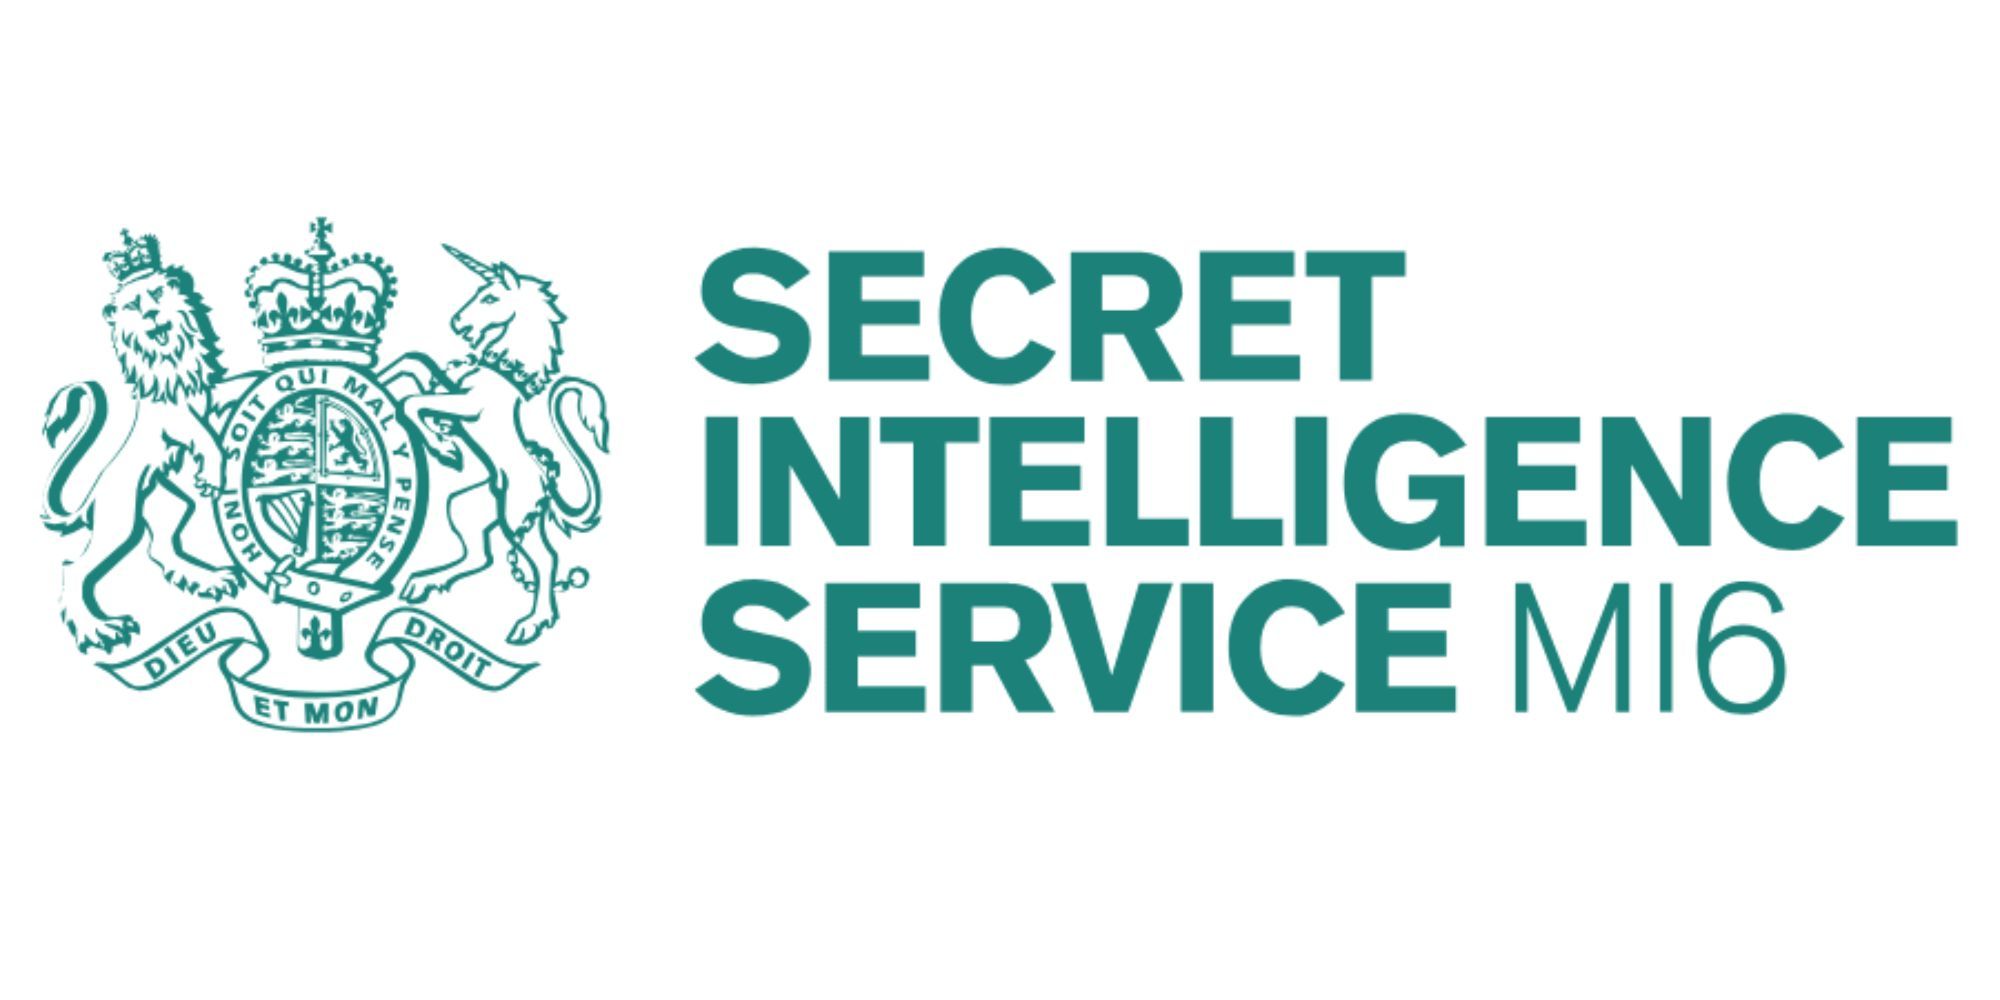 A green and white vector logo for the Secret Service Intelligence